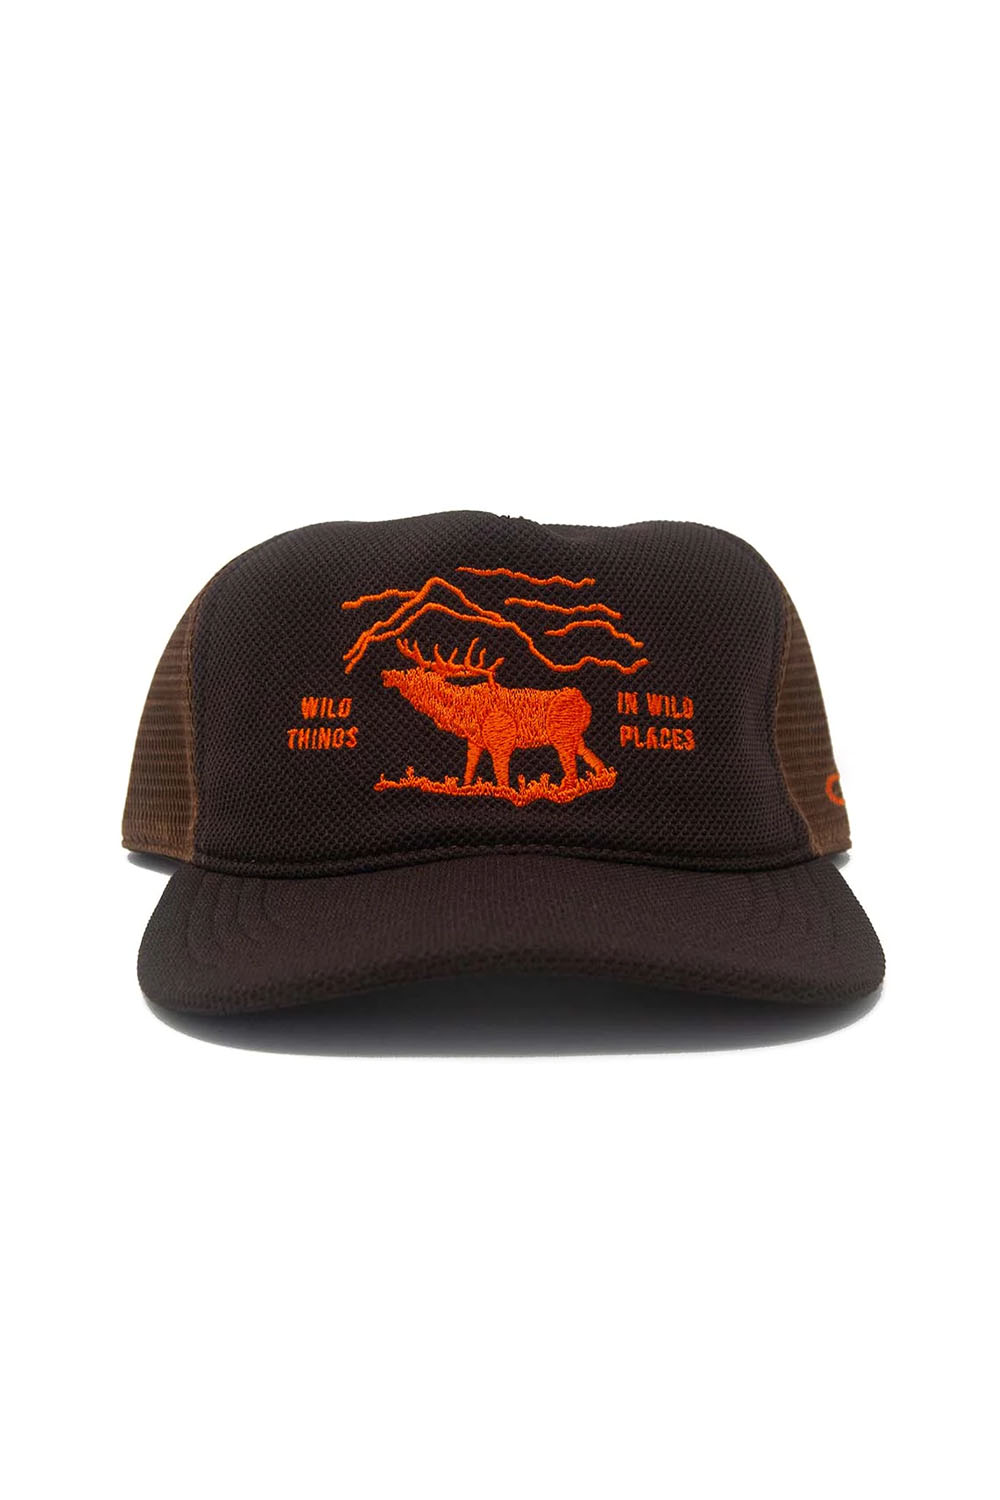 Ampal Creative - Wild Places Snapback - Orange/Brown - Front